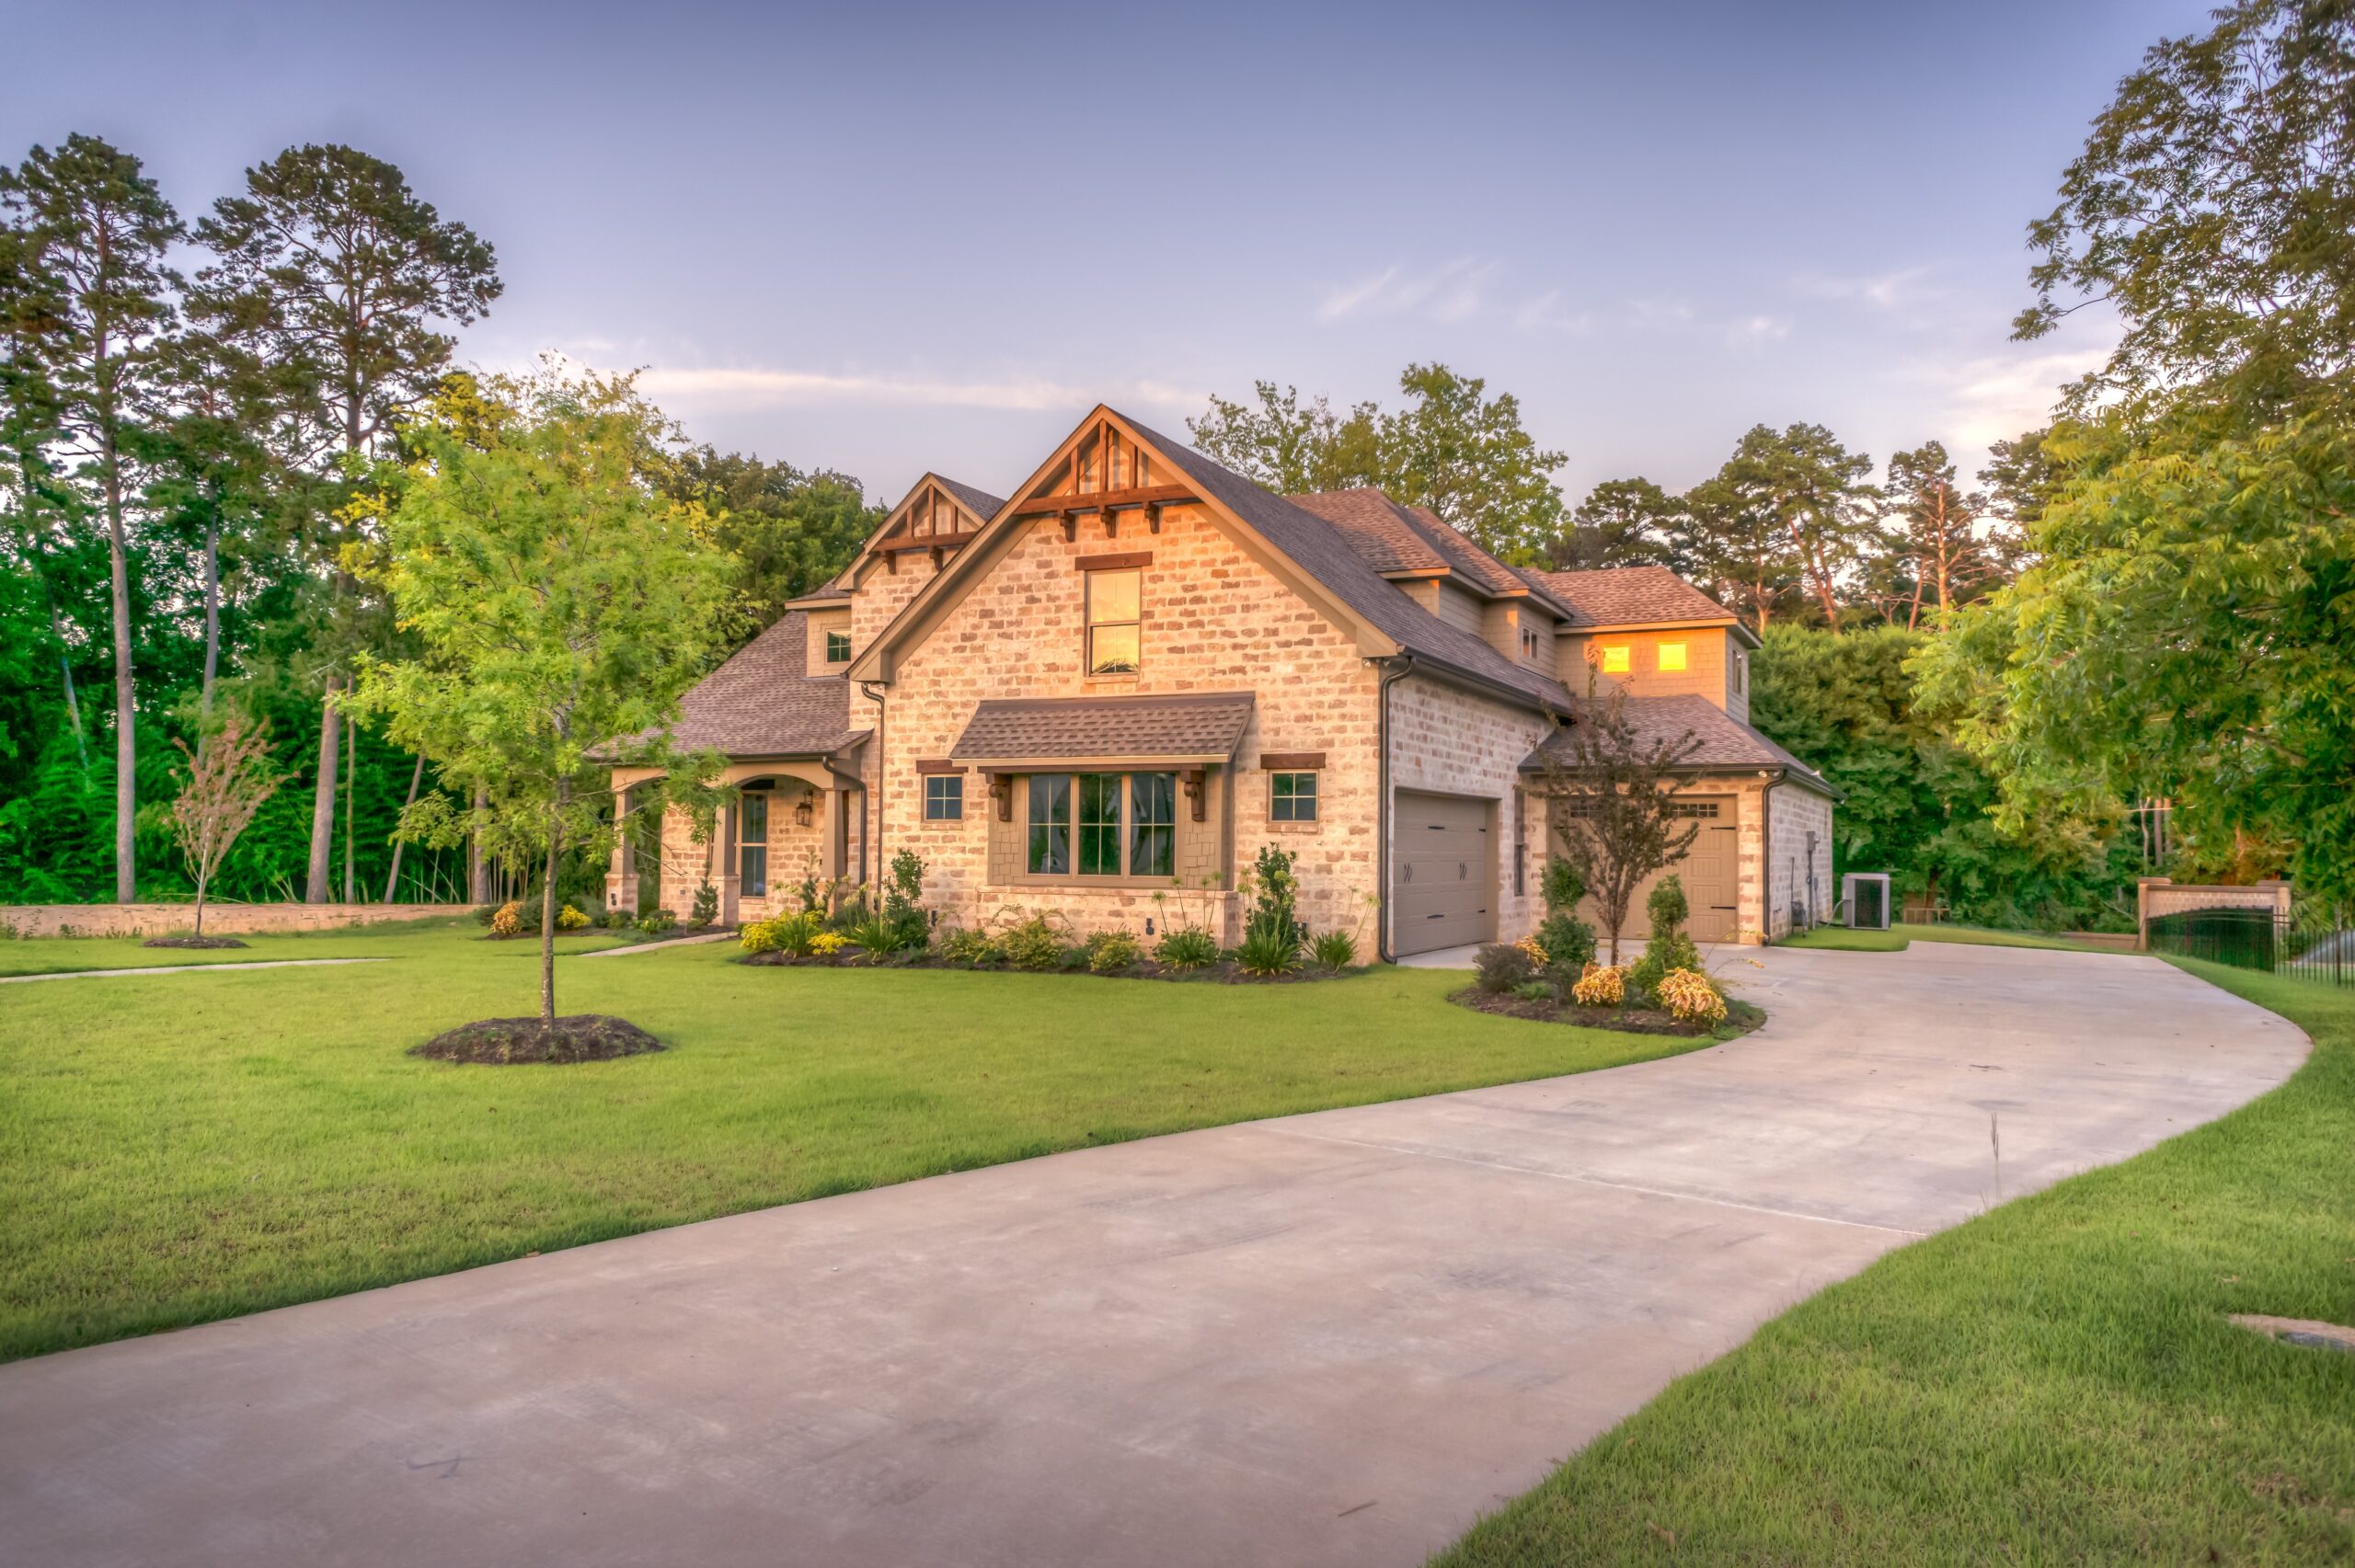 The Key Features Of Choice Home Warranty Plans